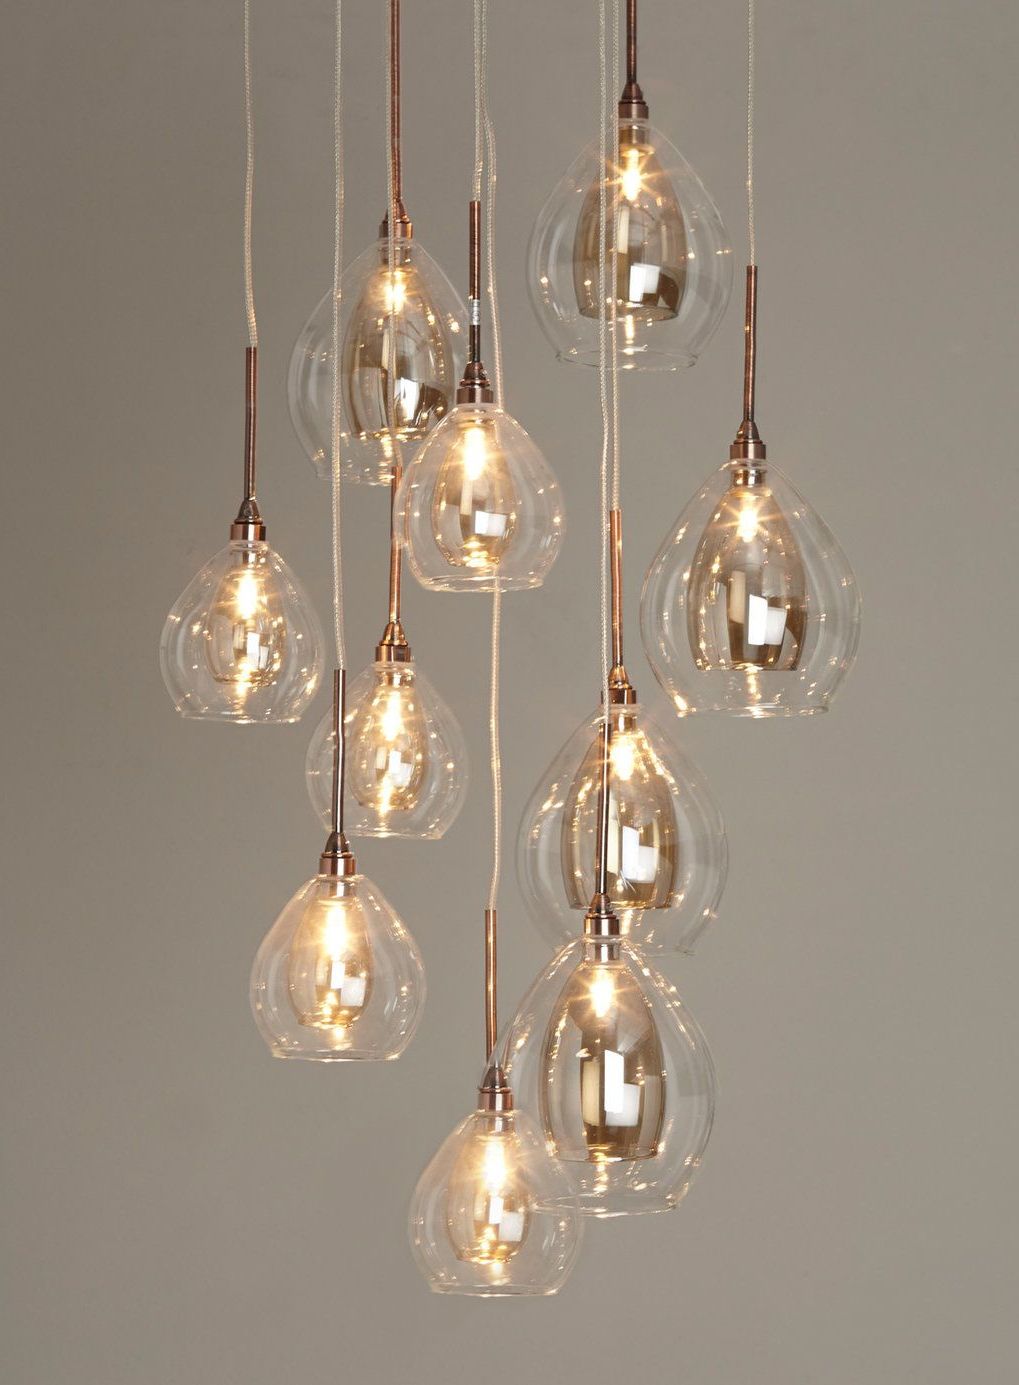 Carmella 10 Light Cluster – Bhs Pendant Over The Kitchen In 2019 Balducci 5 Light Pendants (View 6 of 25)